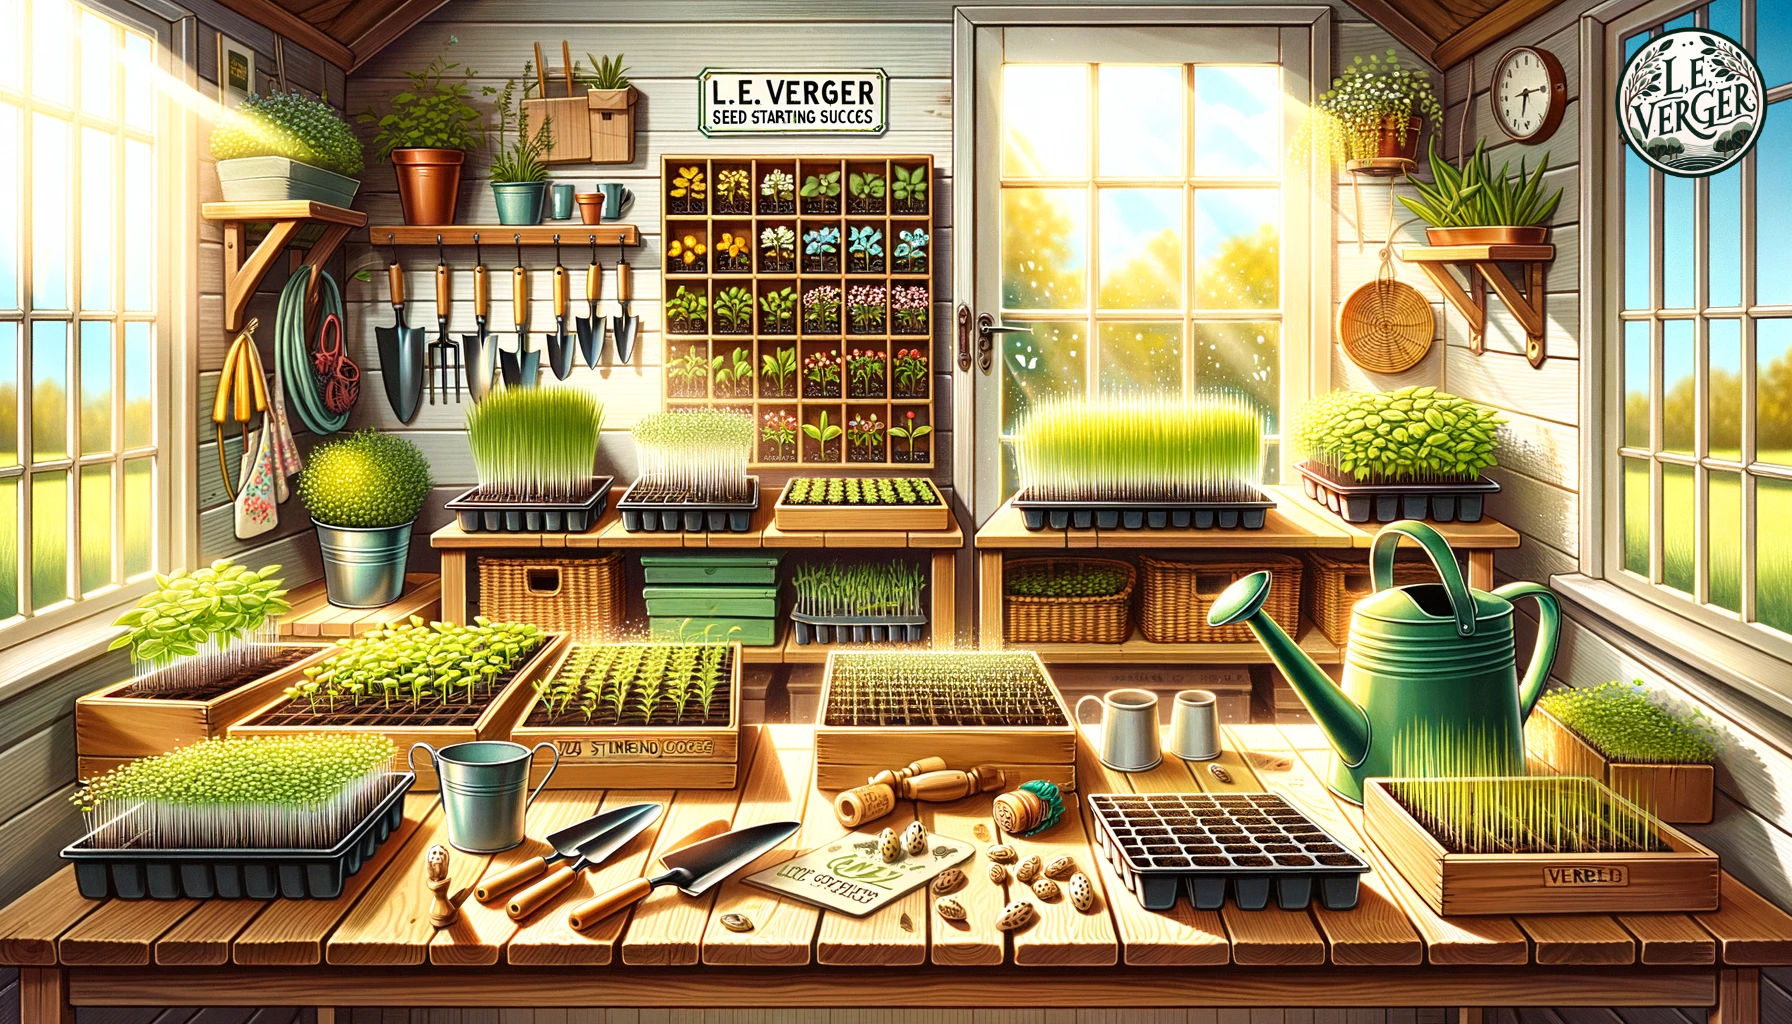 Wide illustration of a bright, sunny garden shed with an array of seedling trays on a wooden table. L.E. Verger's name is elegantly written in the top-left corner. Various plants, from tiny sprouts to more developed seedlings, grow within the trays. Gardening tools like a watering can, trowel, and gardening gloves are neatly placed nearby. A label reading 'Seed Starting Success' stands out prominently in the foreground.